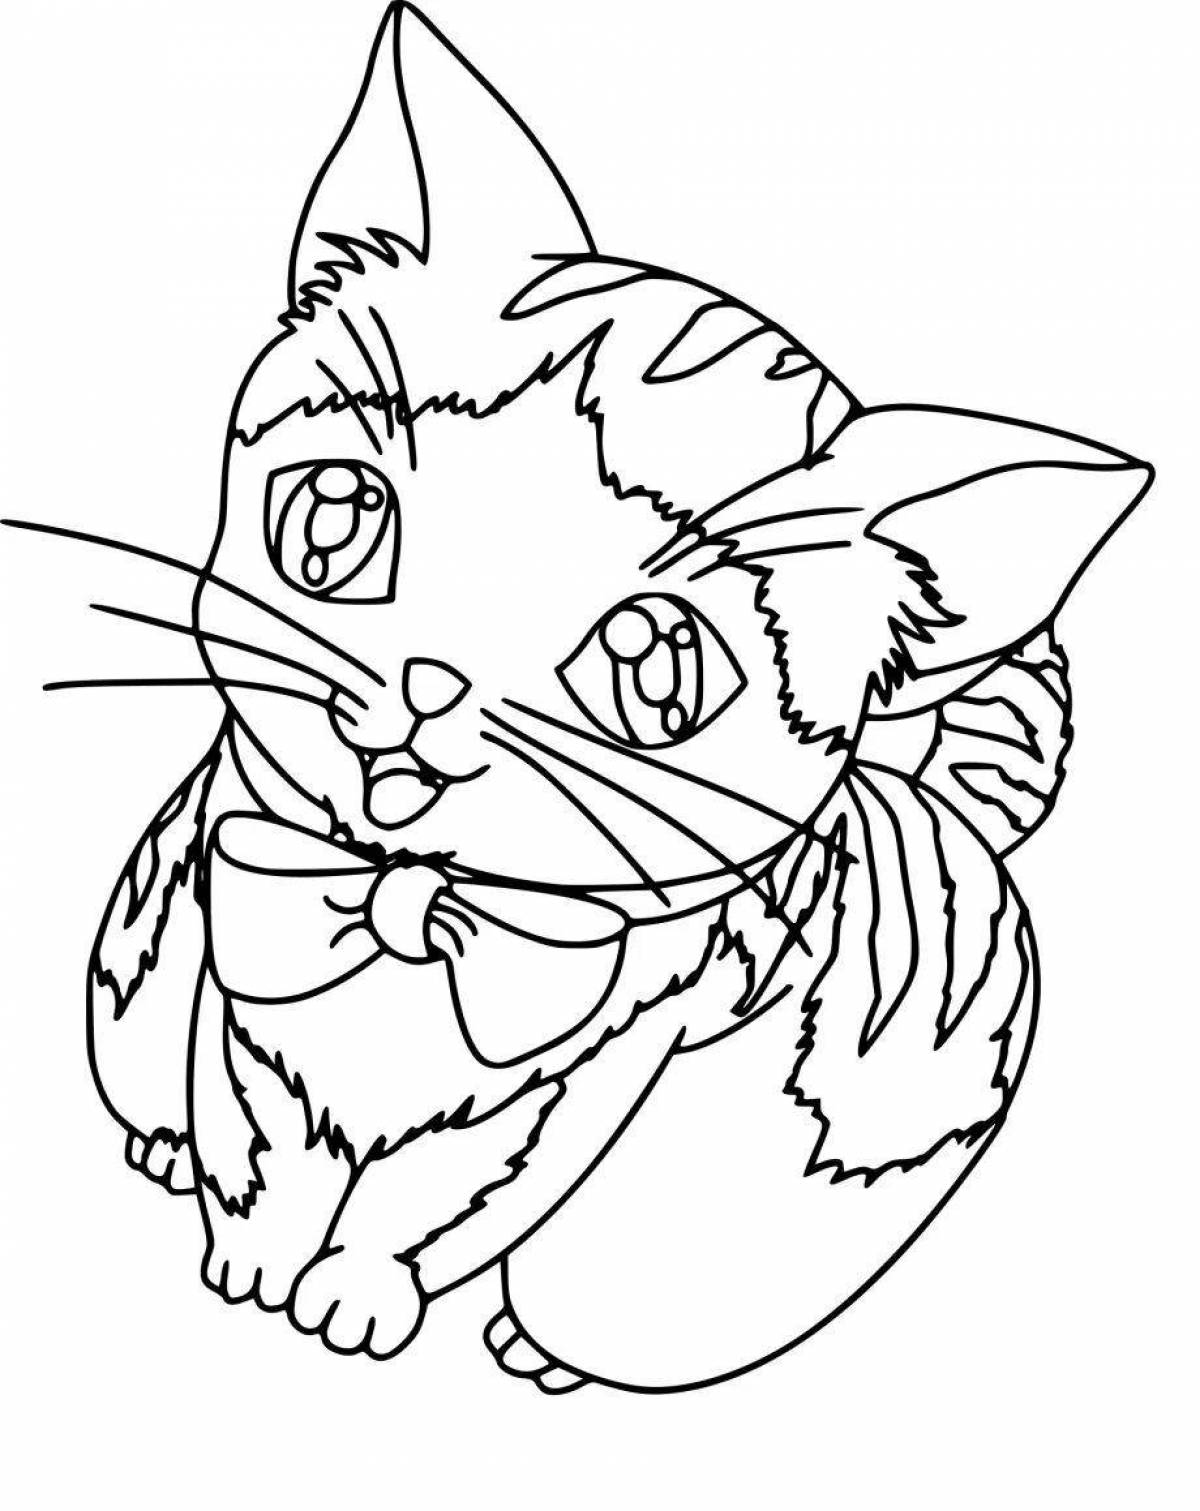 Coloring page bizarre kittens